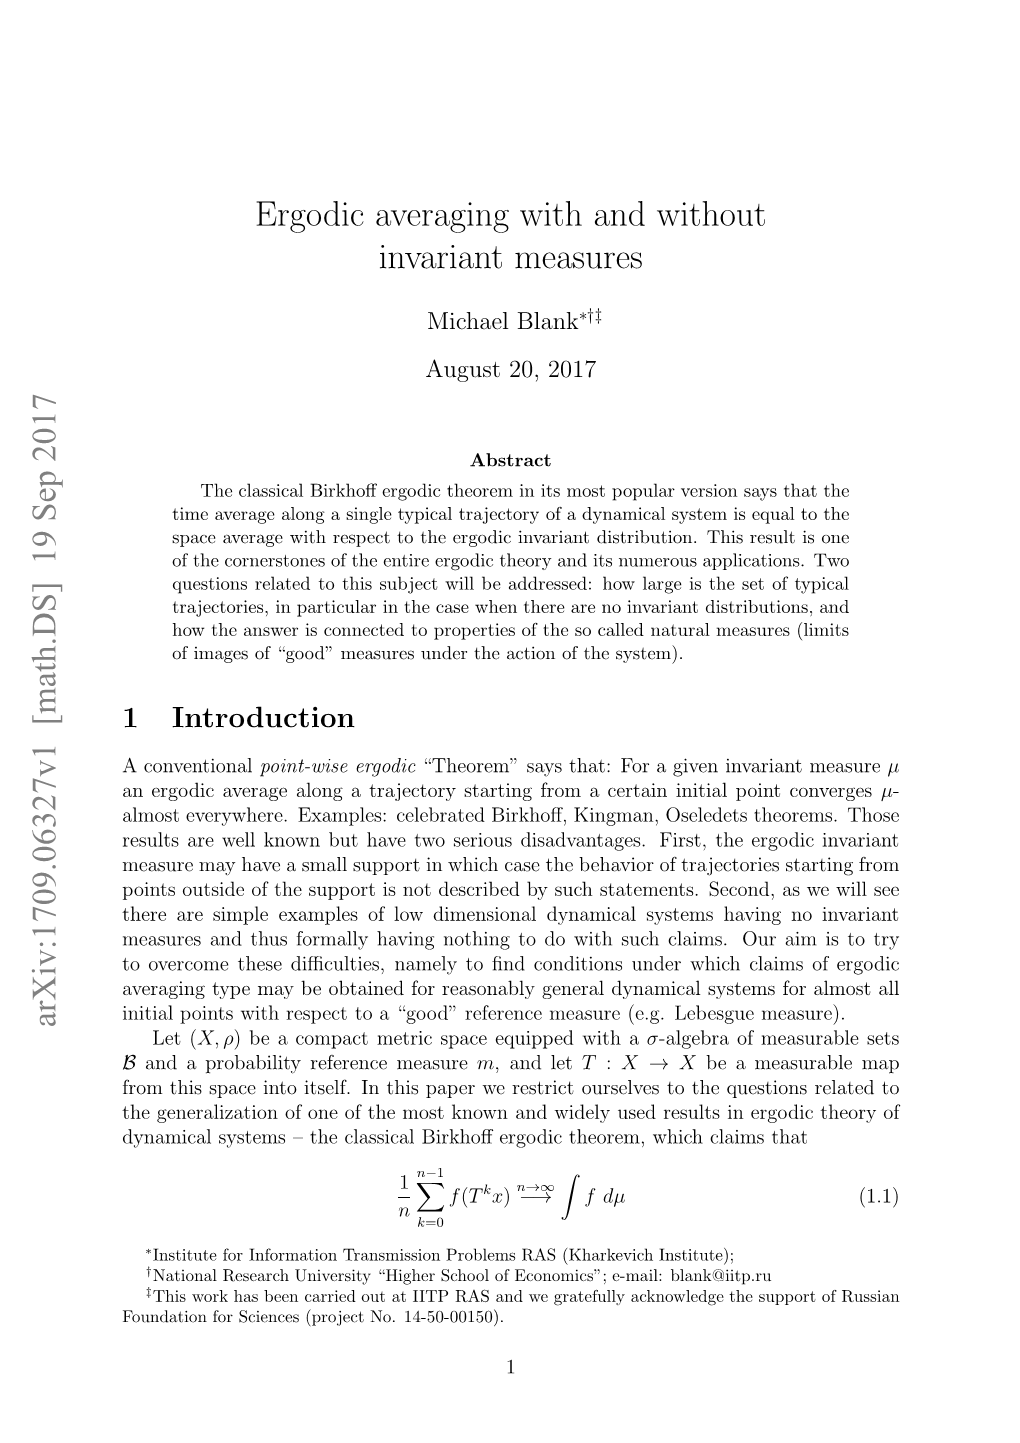 Ergodic Averaging with and Without Invariant Measures